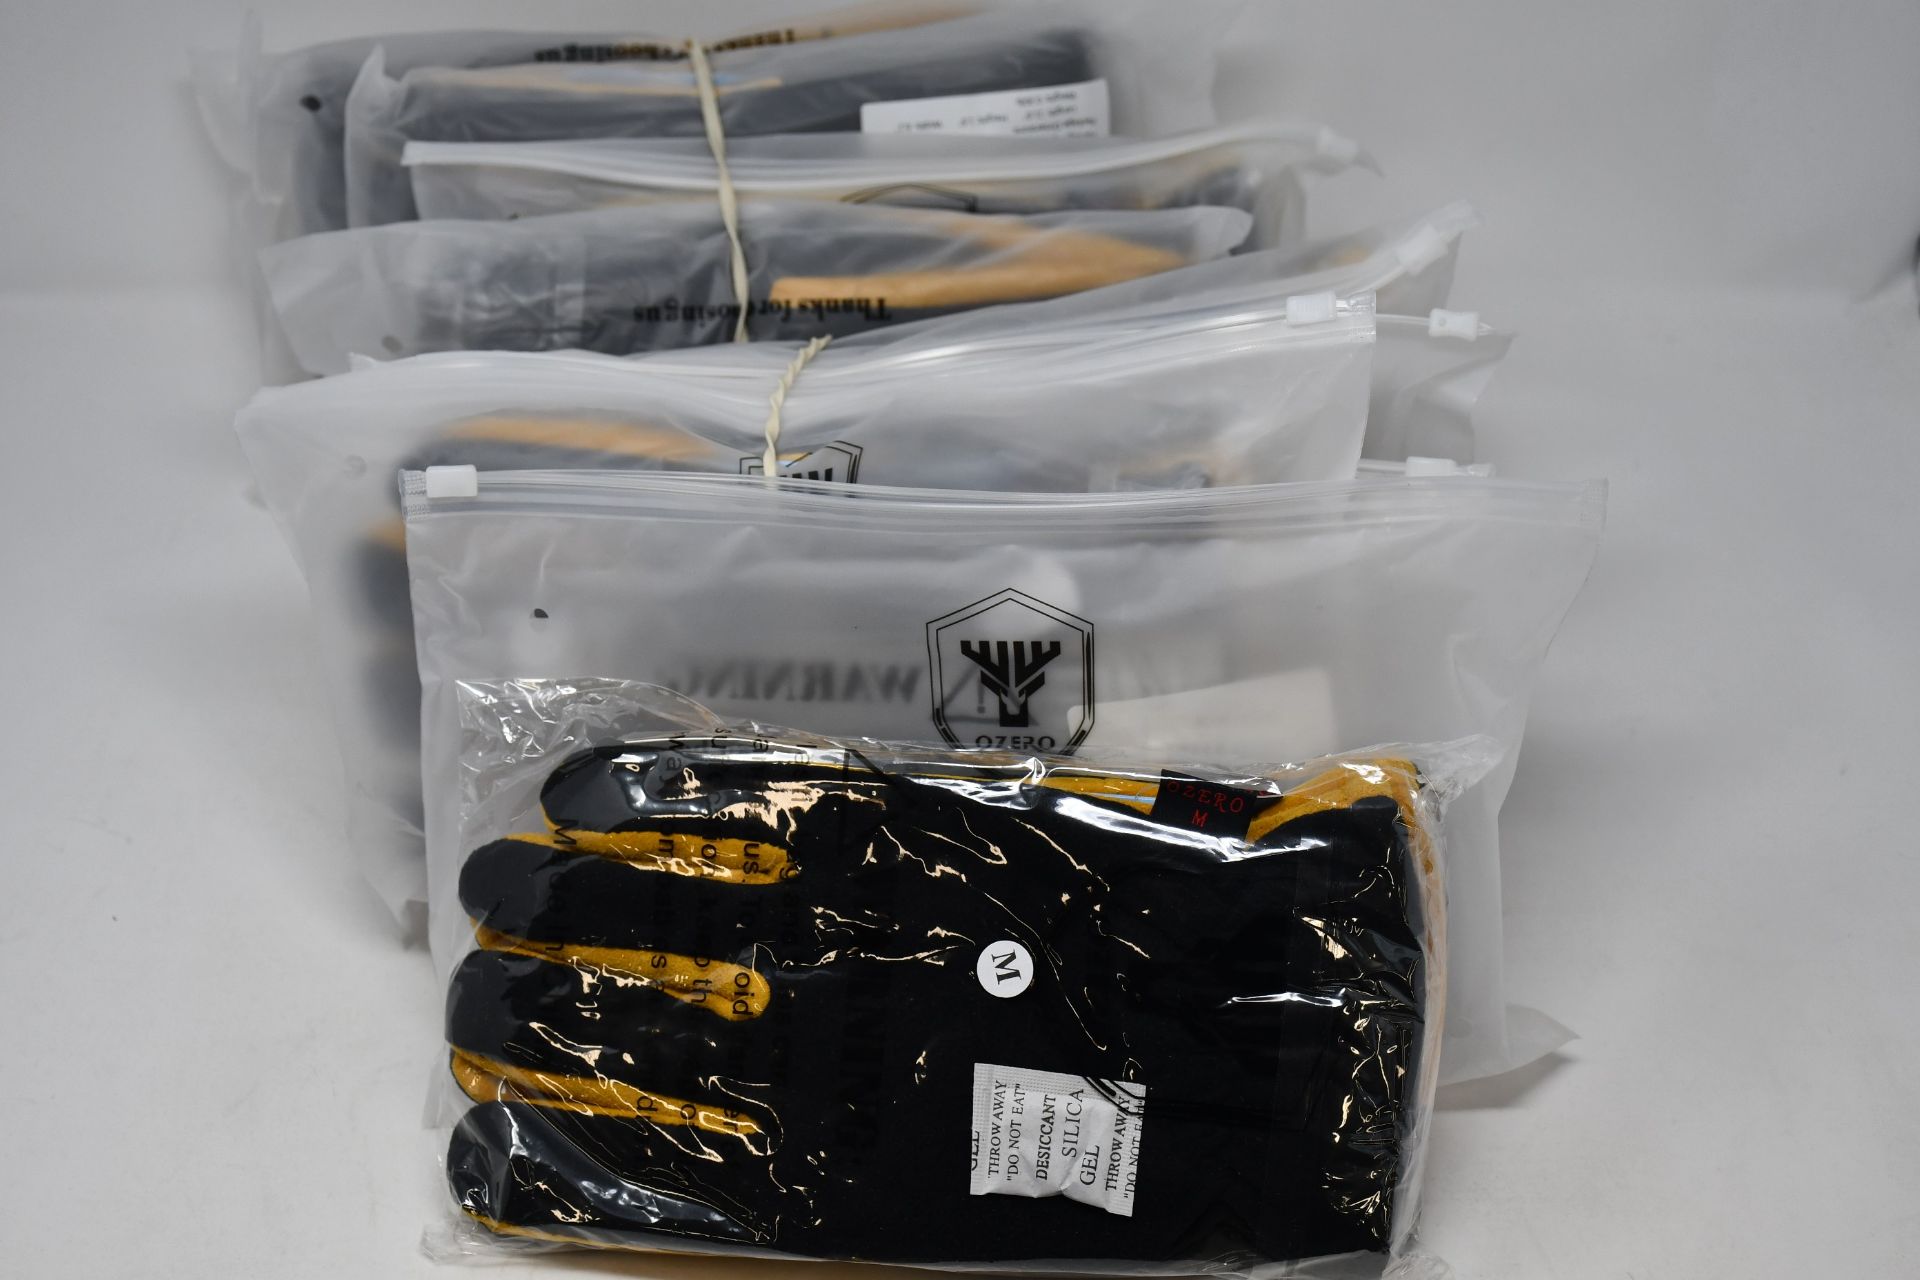 Ten pairs of as new Ozone leather gloves; deerskin suede palm, polar fleece back and heatlock